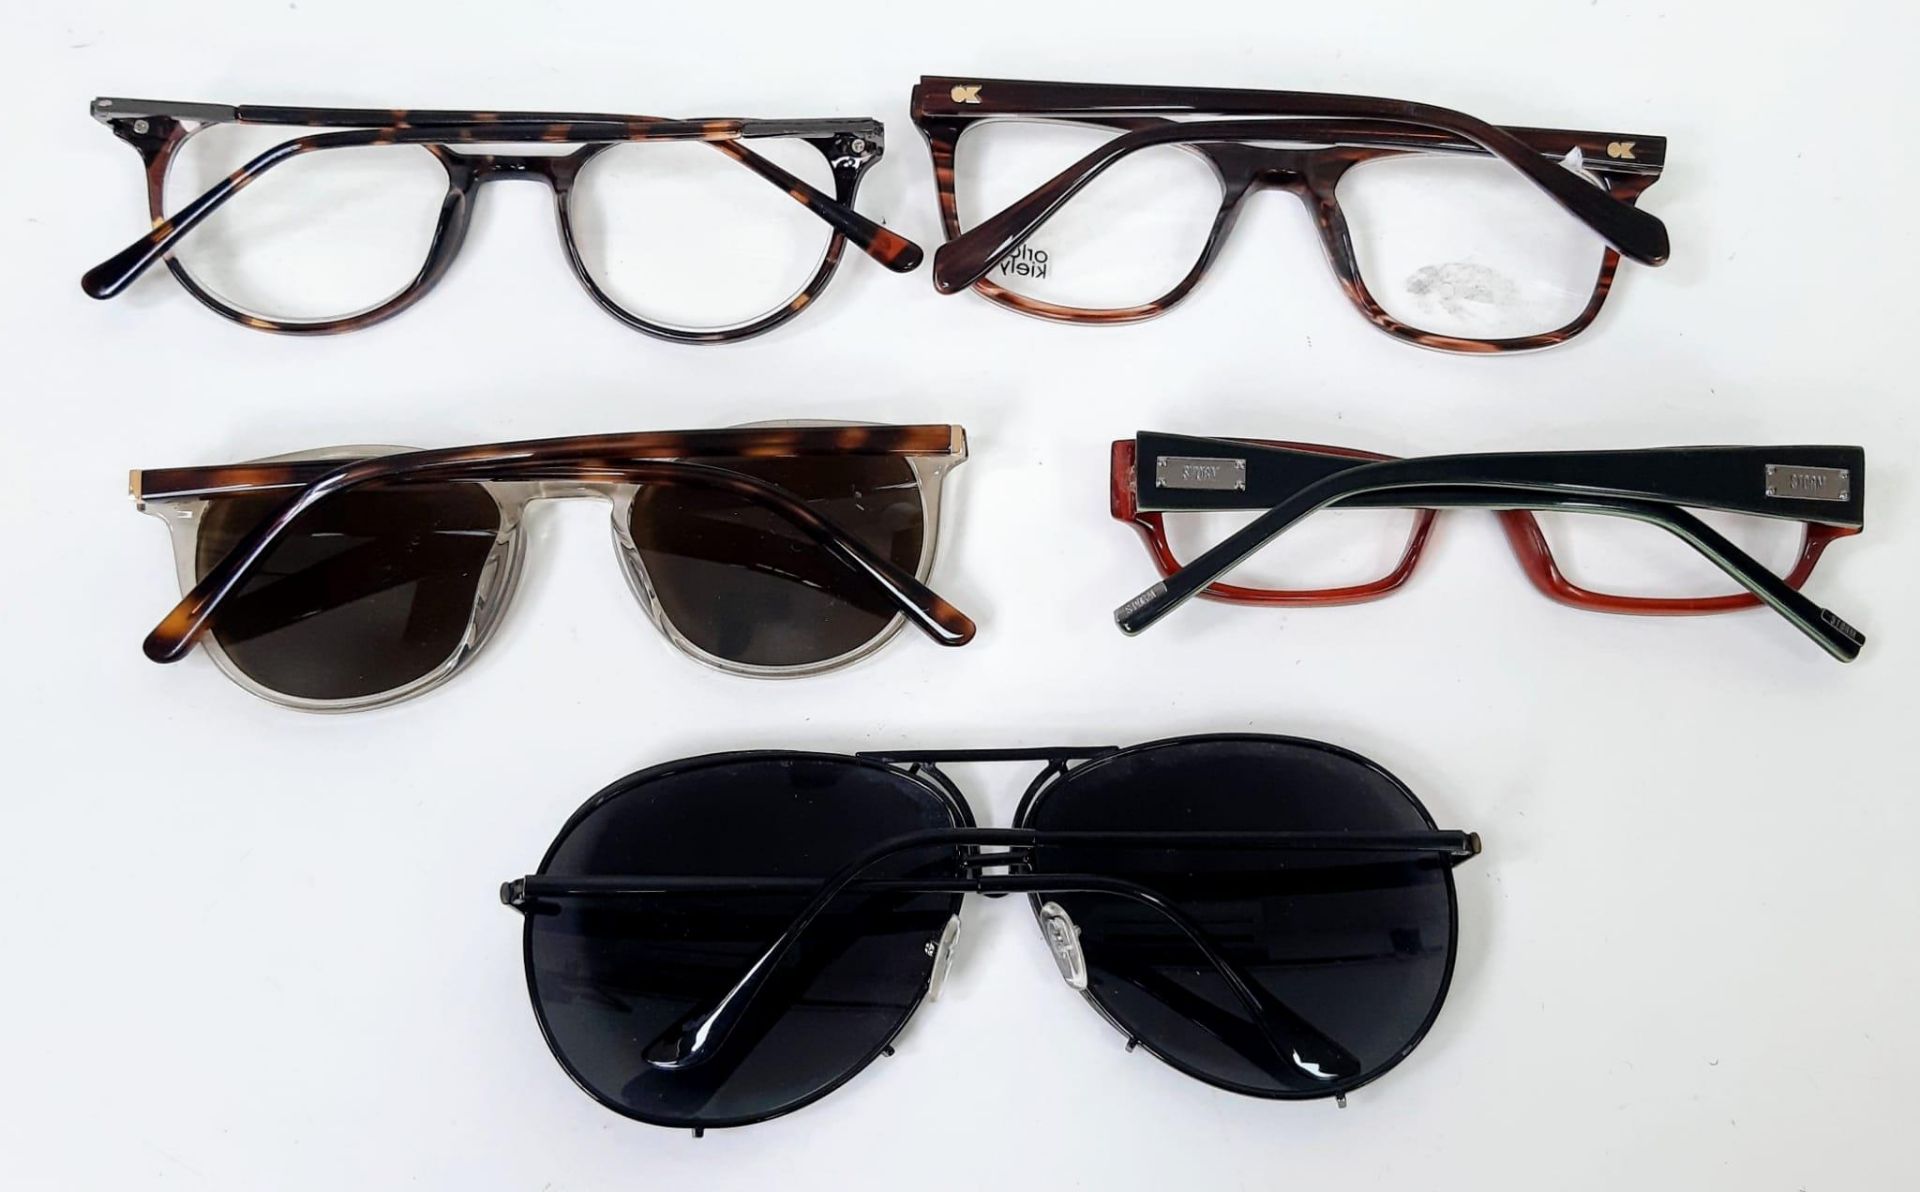 Five Pairs of Branded Glasses/Sunglasses - Image 5 of 6